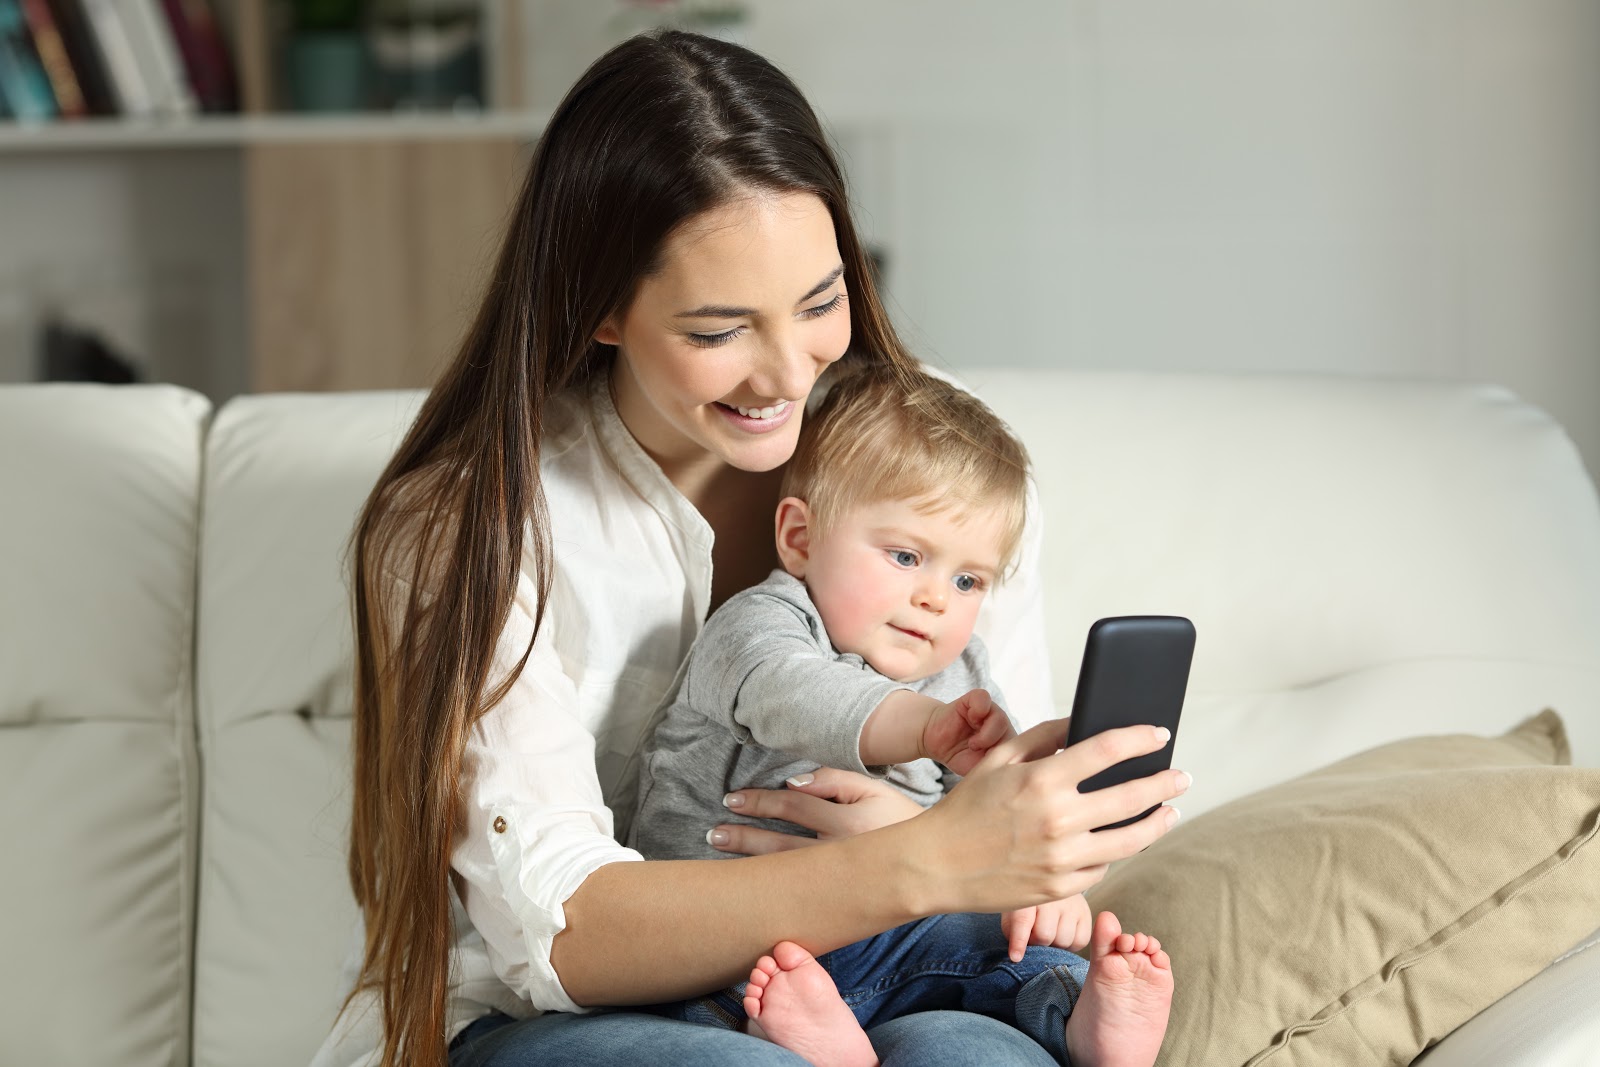 Woman-with-child-playing-with-smartphone